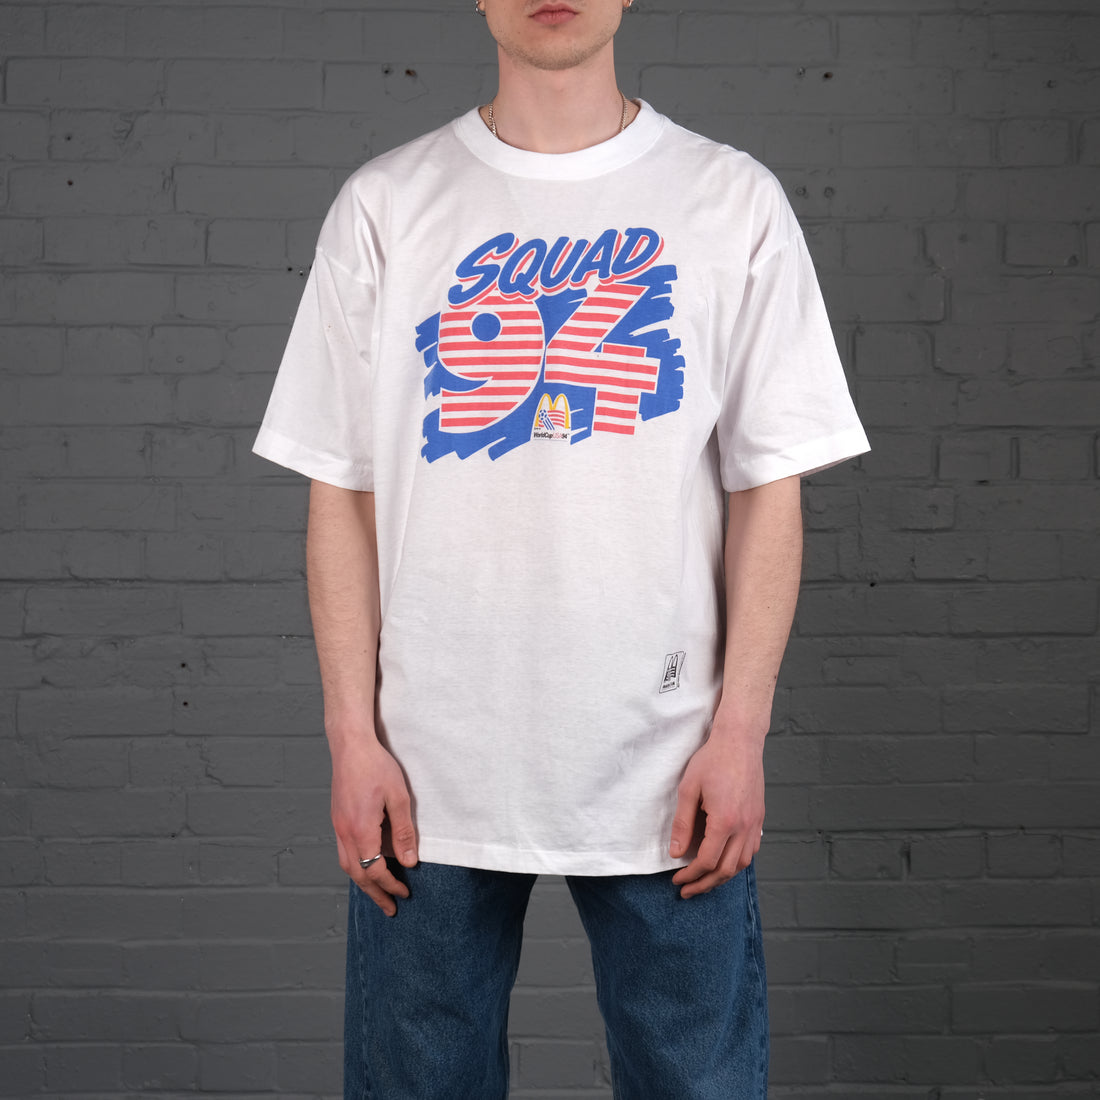 Vintage USA Squad 94 graphic t-shirt in White